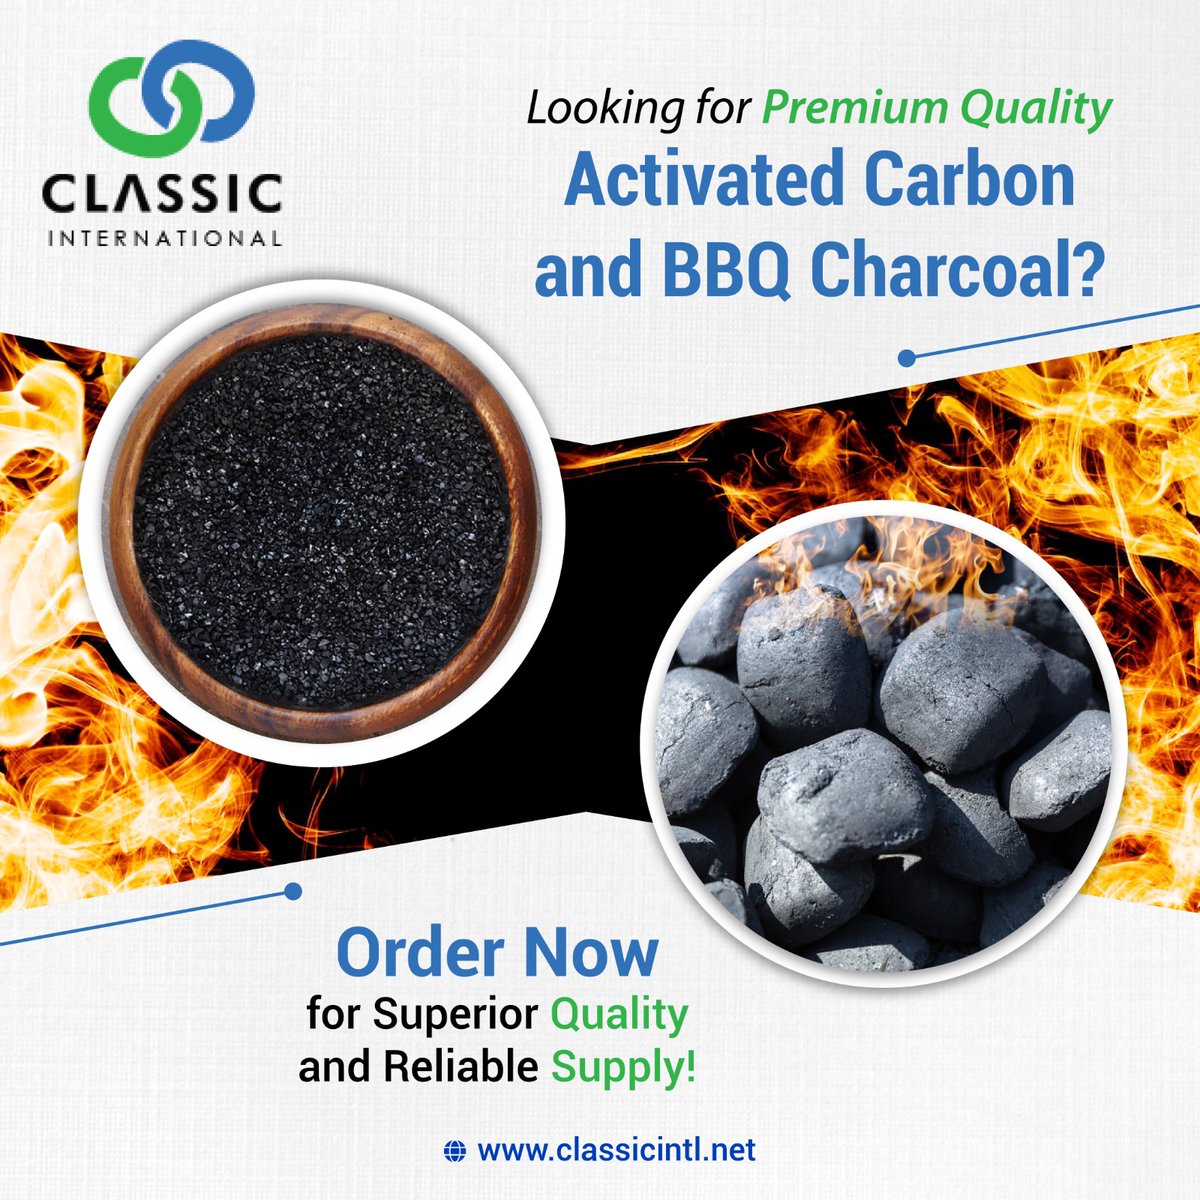 🔥 Are you in search of top-notch Activated Carbon and BBQ Charcoal? Look no further! 🔥
🔗Order now for premium quality and a reliable supply🔗
🌐classicintl.net
#ActivatedCarbon #BBQCharcoal #PremiumQuality #SuperiorQuality #ReliableSupply #ClassicInternational